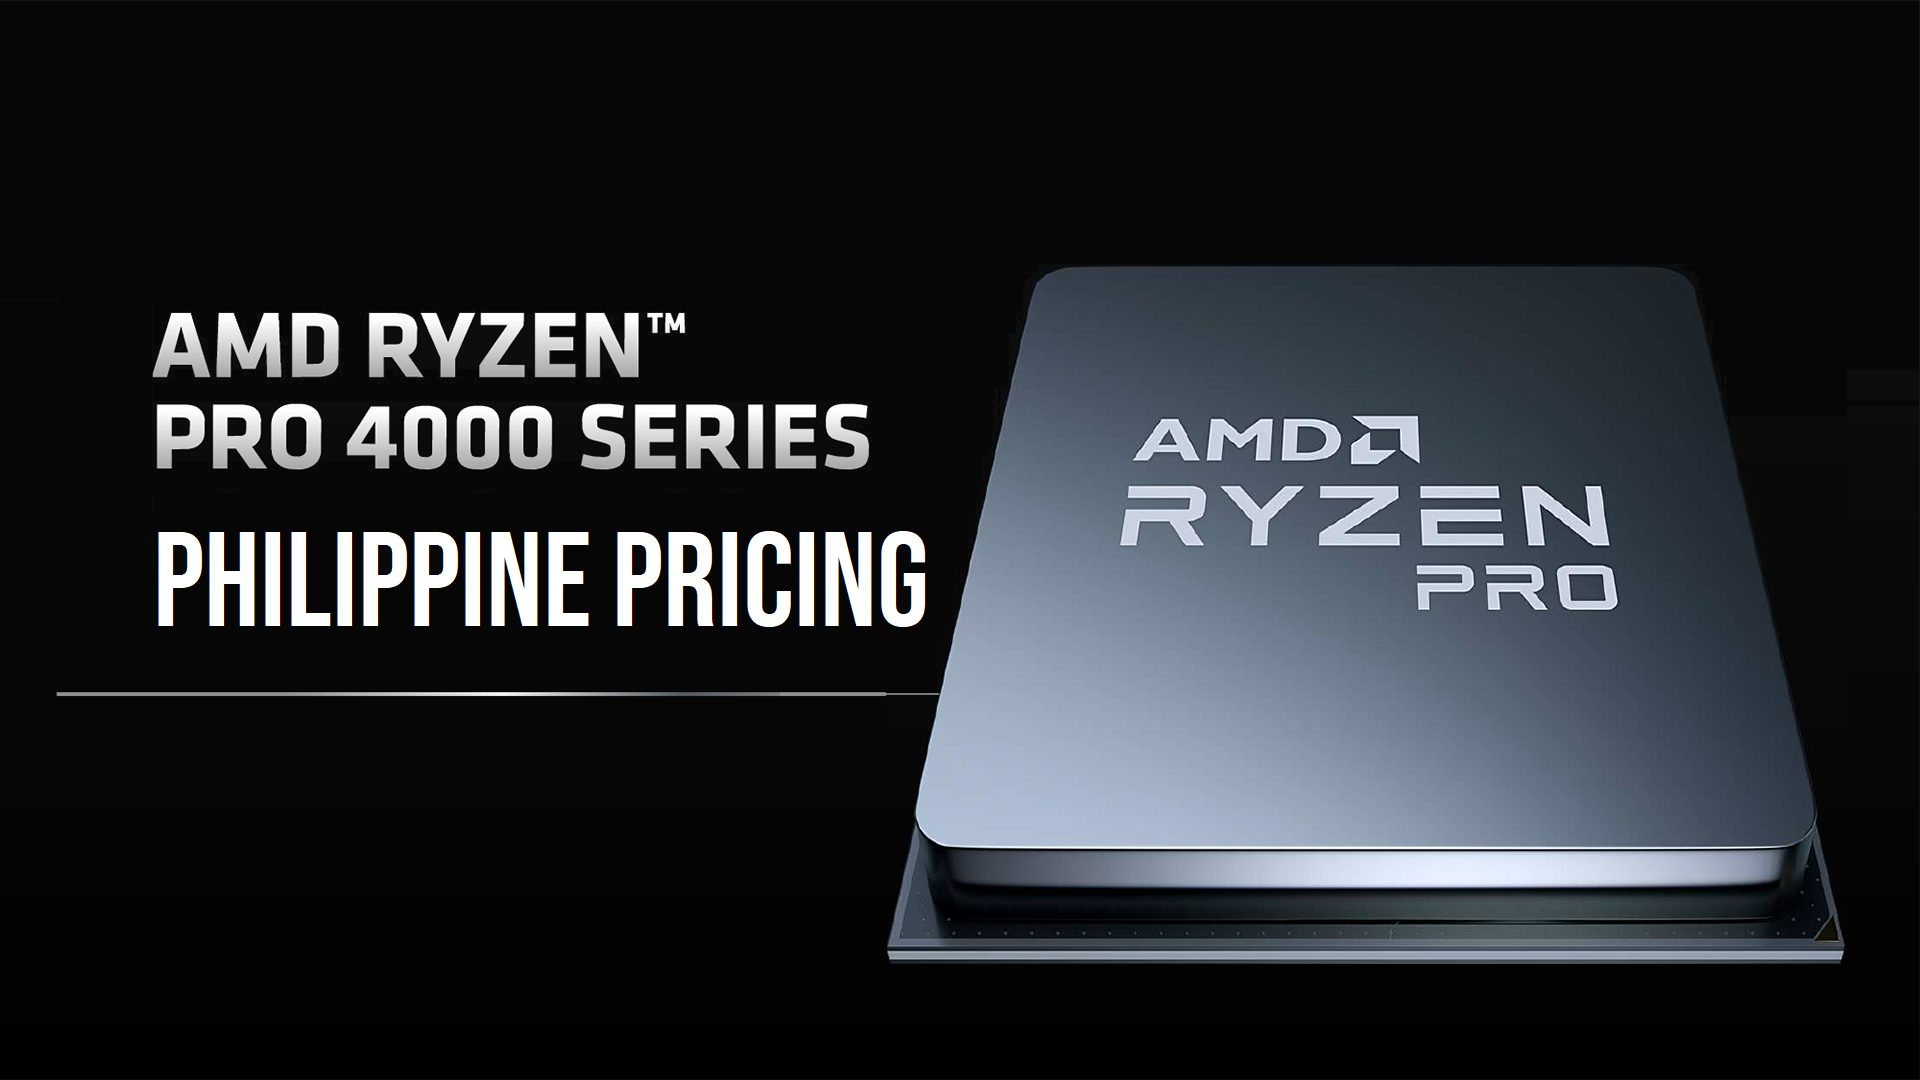 Pchub Releases Amd Ryzen Pro 4000 Processors Priced Gadget Pilipinas Tech News Reviews Benchmarks And Build Guides